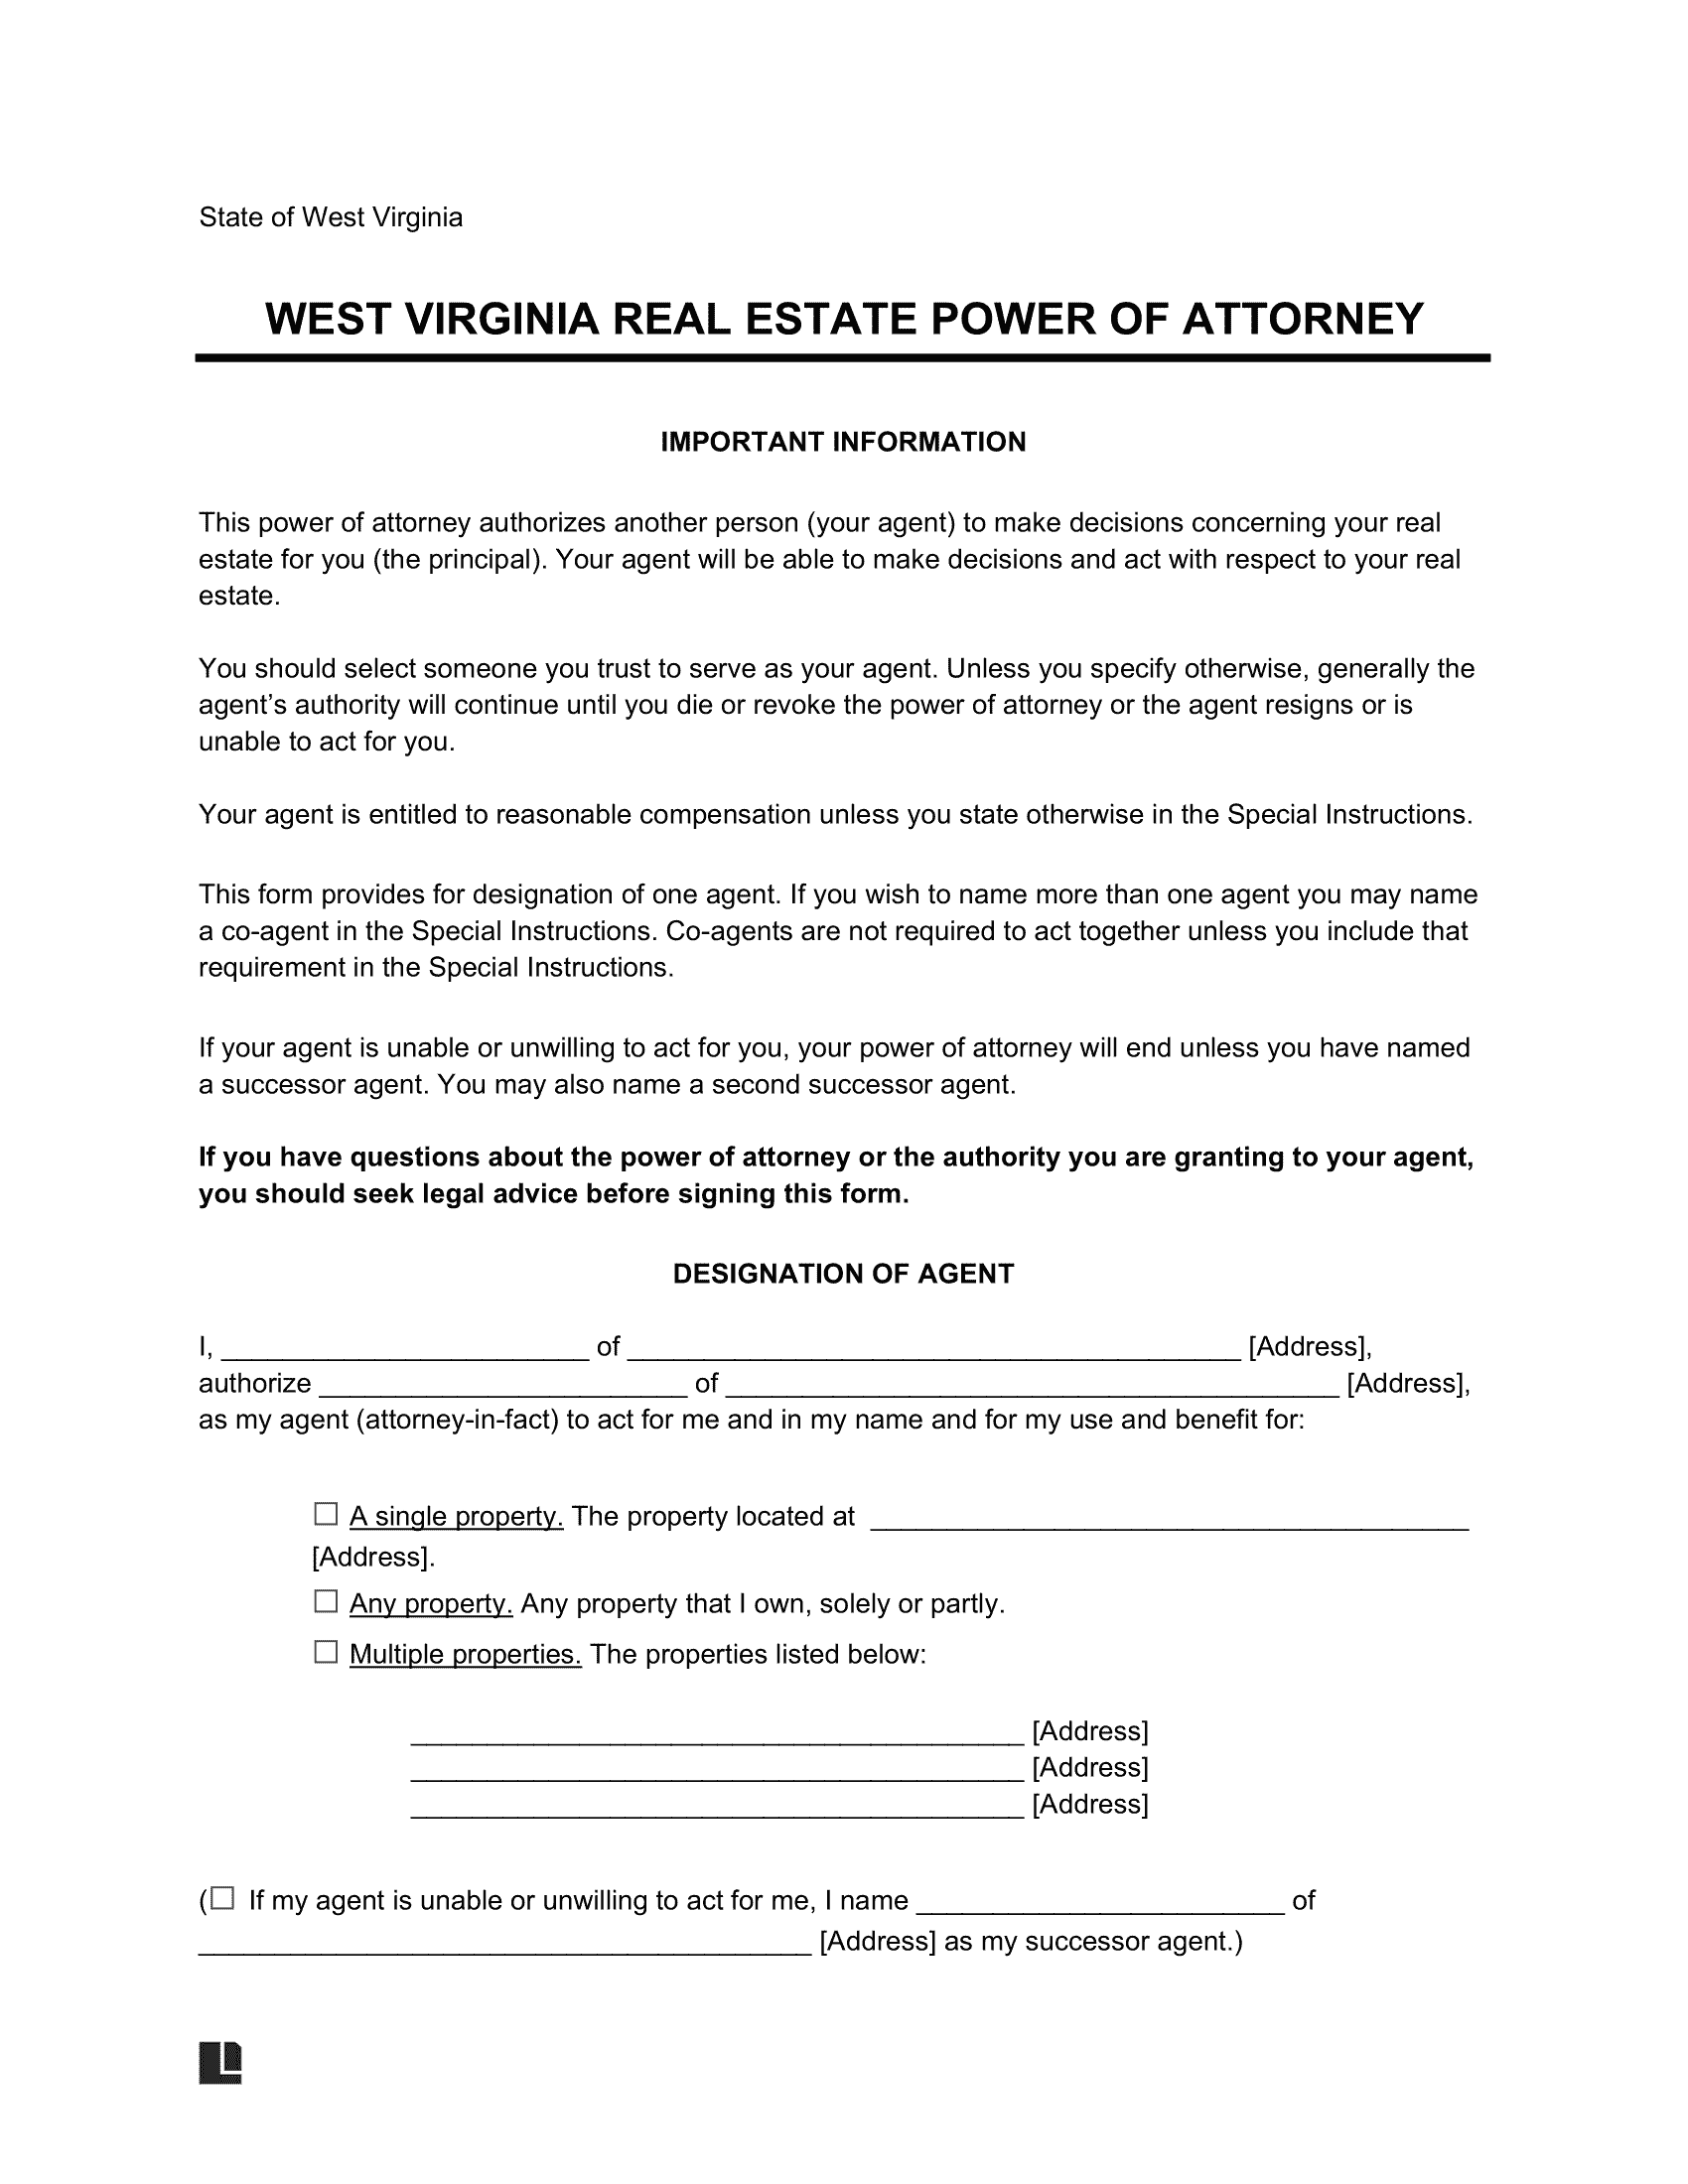 West Virginia Real Estate Power of Attorney Form